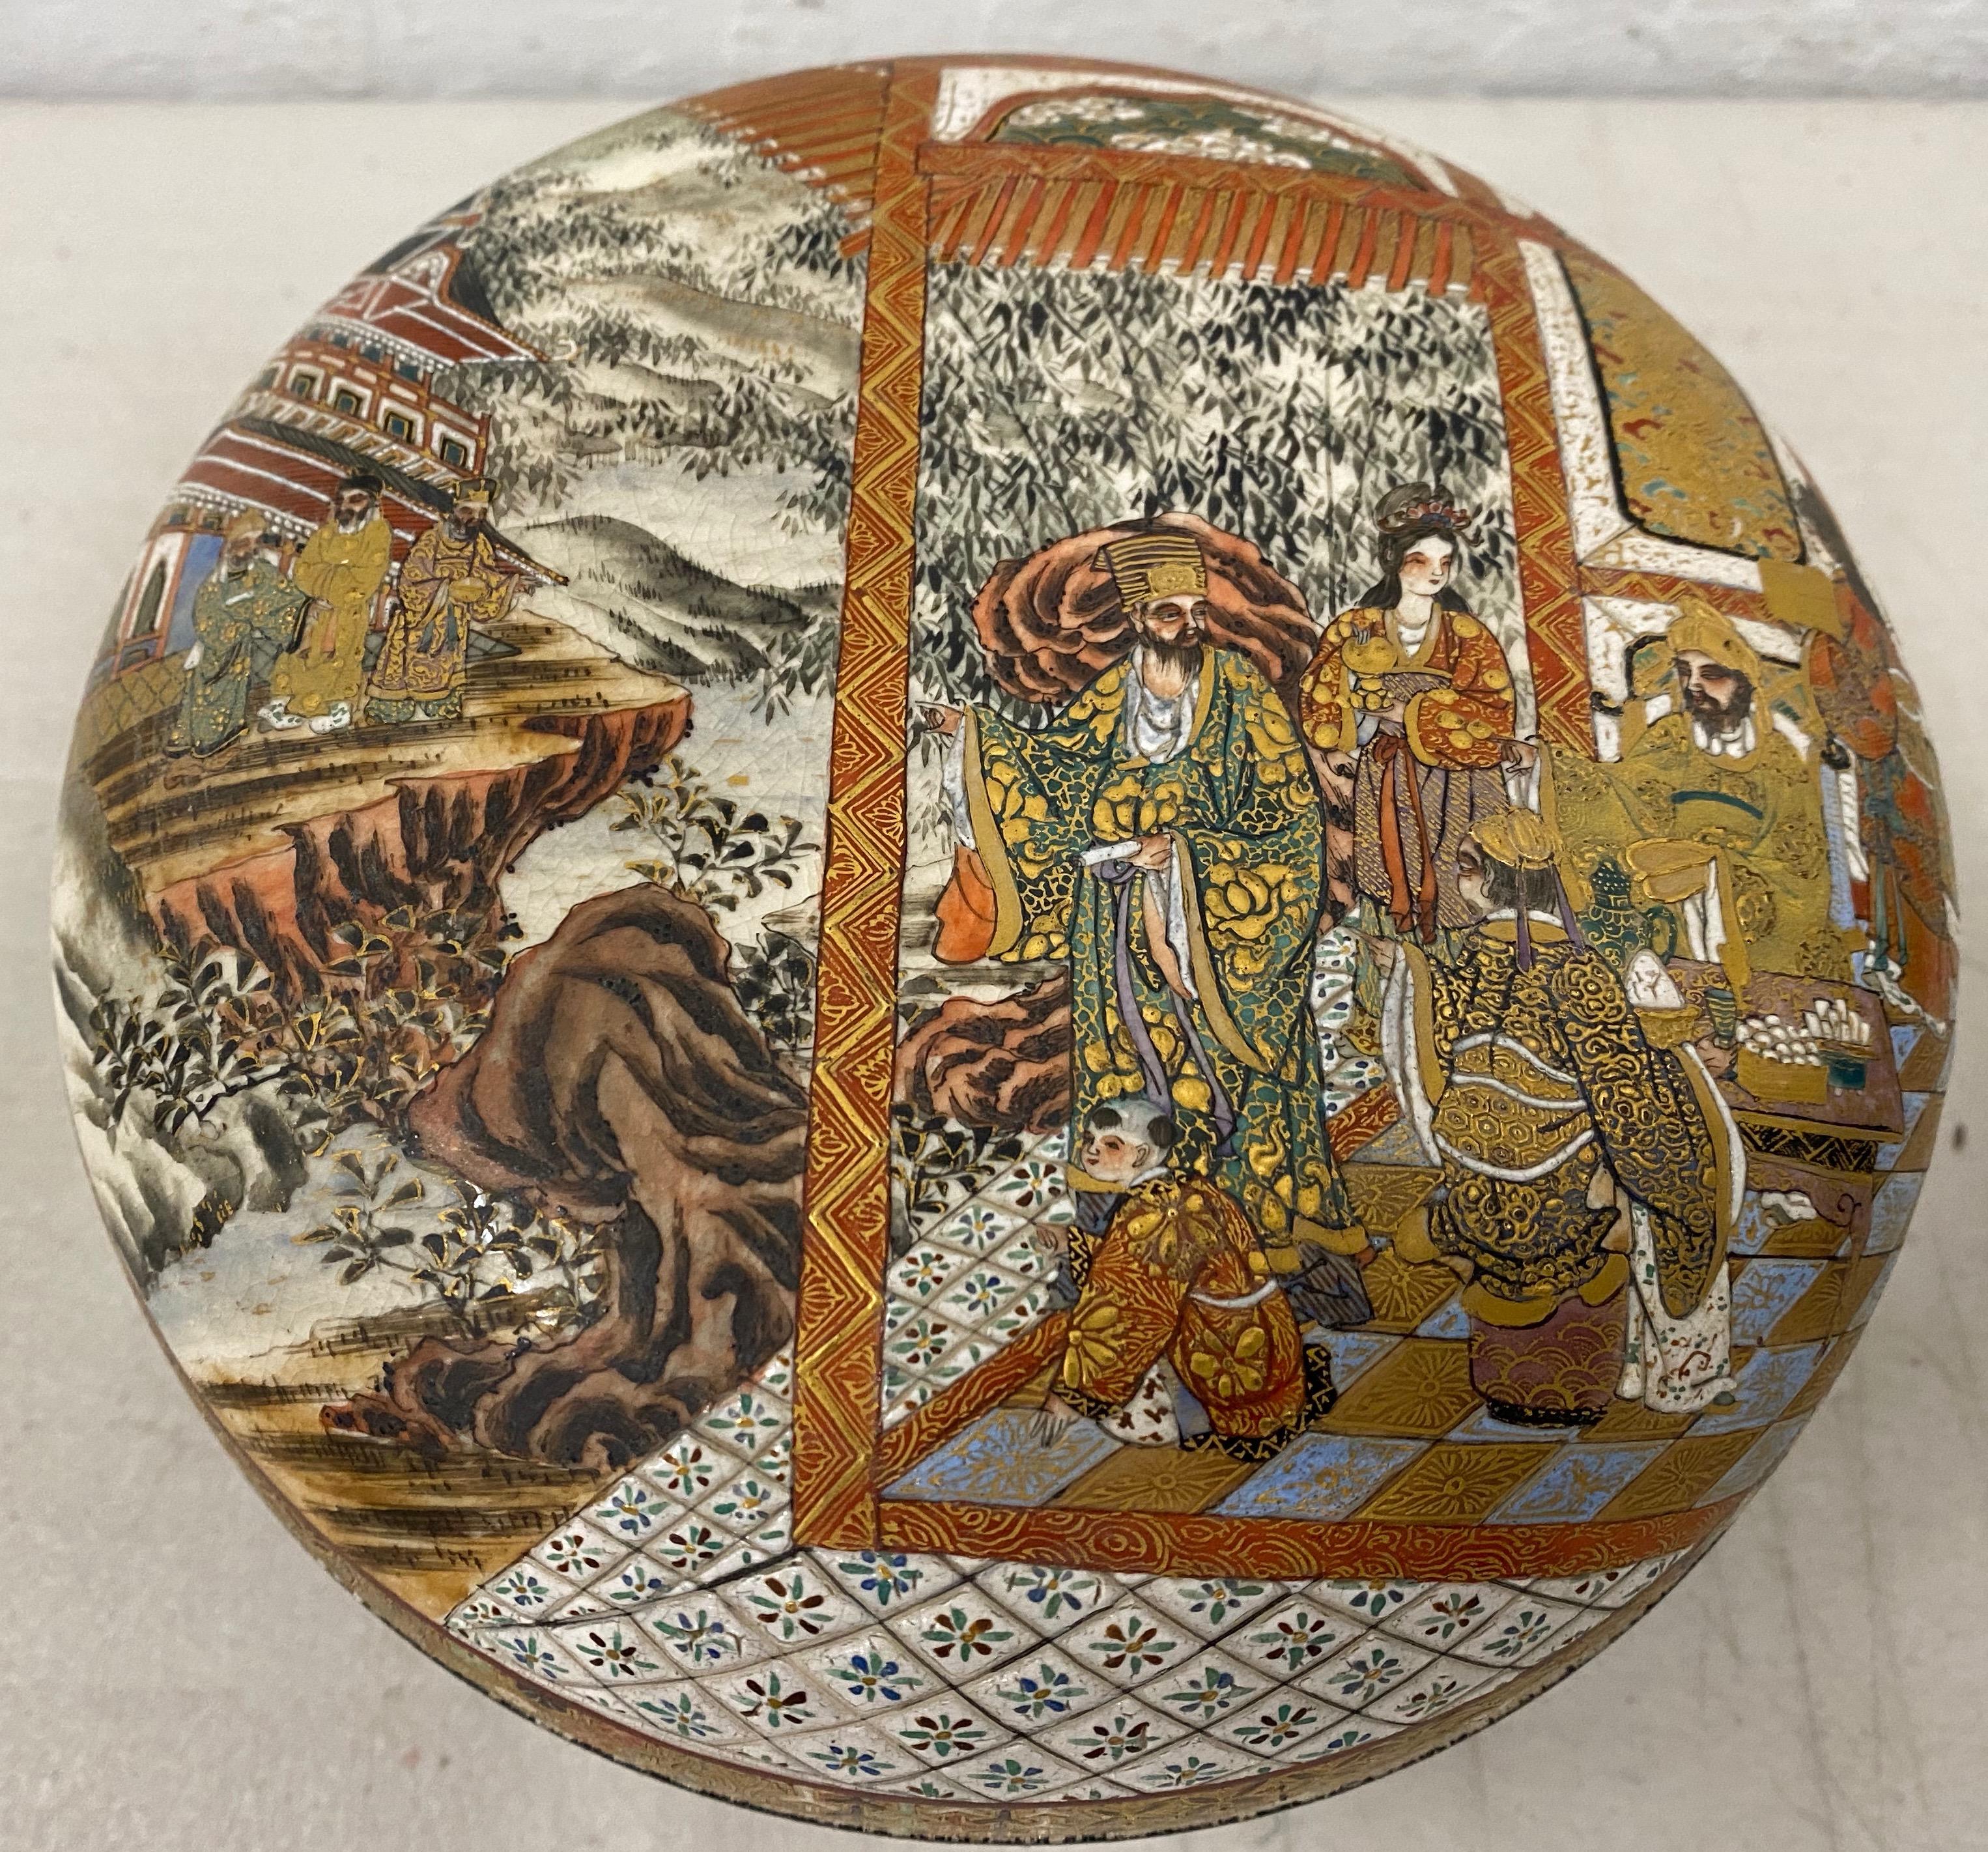 Exquisite Hand Painted Japanese Satsuma Lidded Bowl

A stunning lidded Japanese Satsuma bowl, likely Meiji period, completely hand painted inside and out. This could be used on your dresser to hold your jewelry, or in your curio on display. The